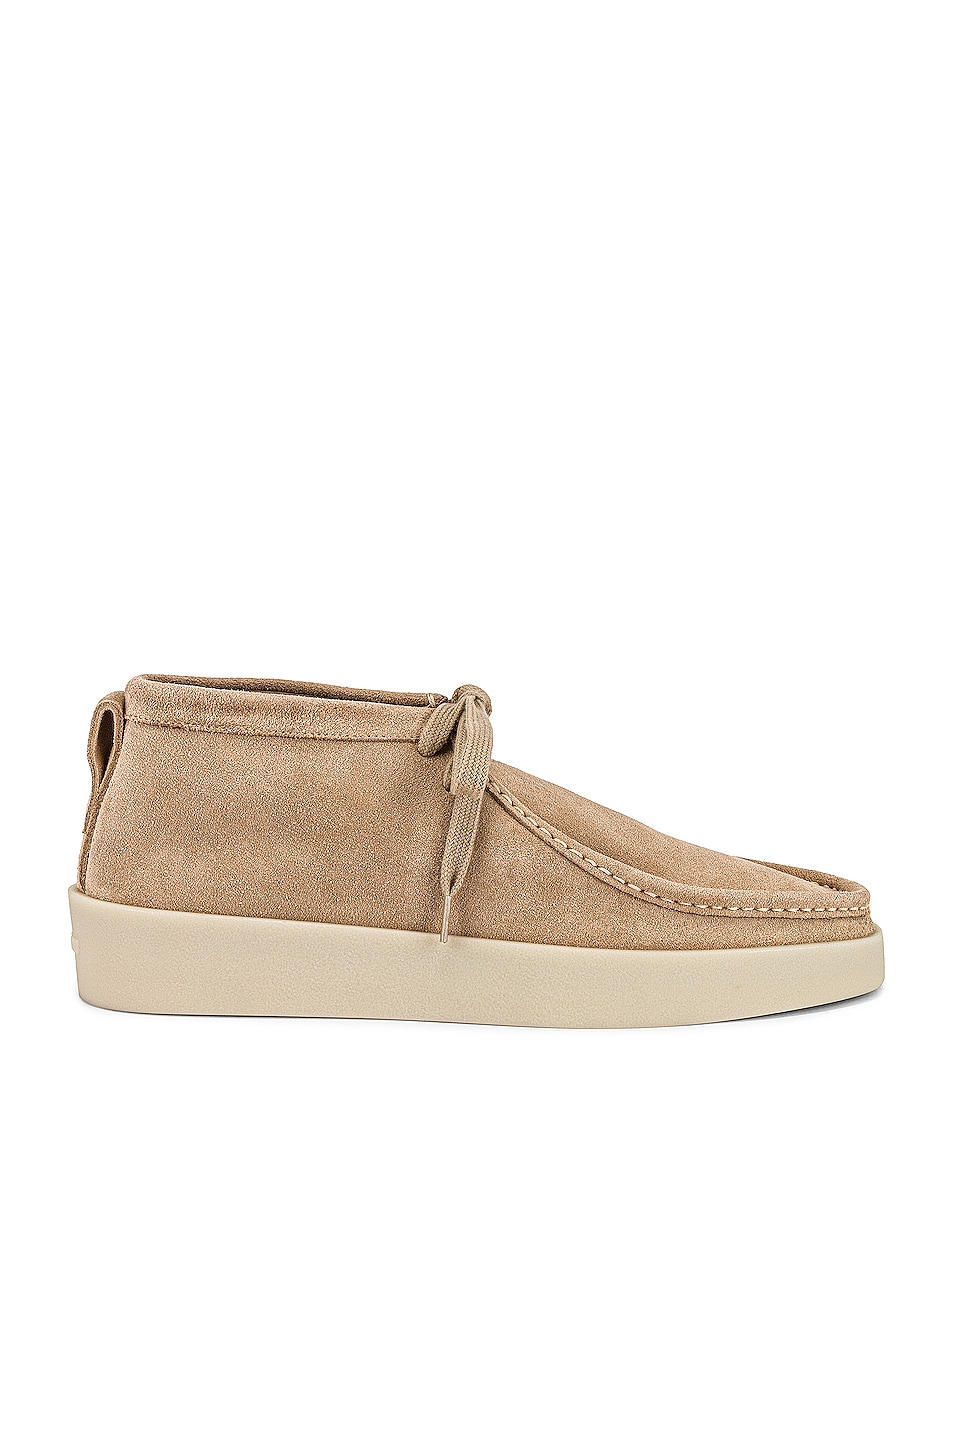 Image 1 of Fear of God Wallabee in Sand